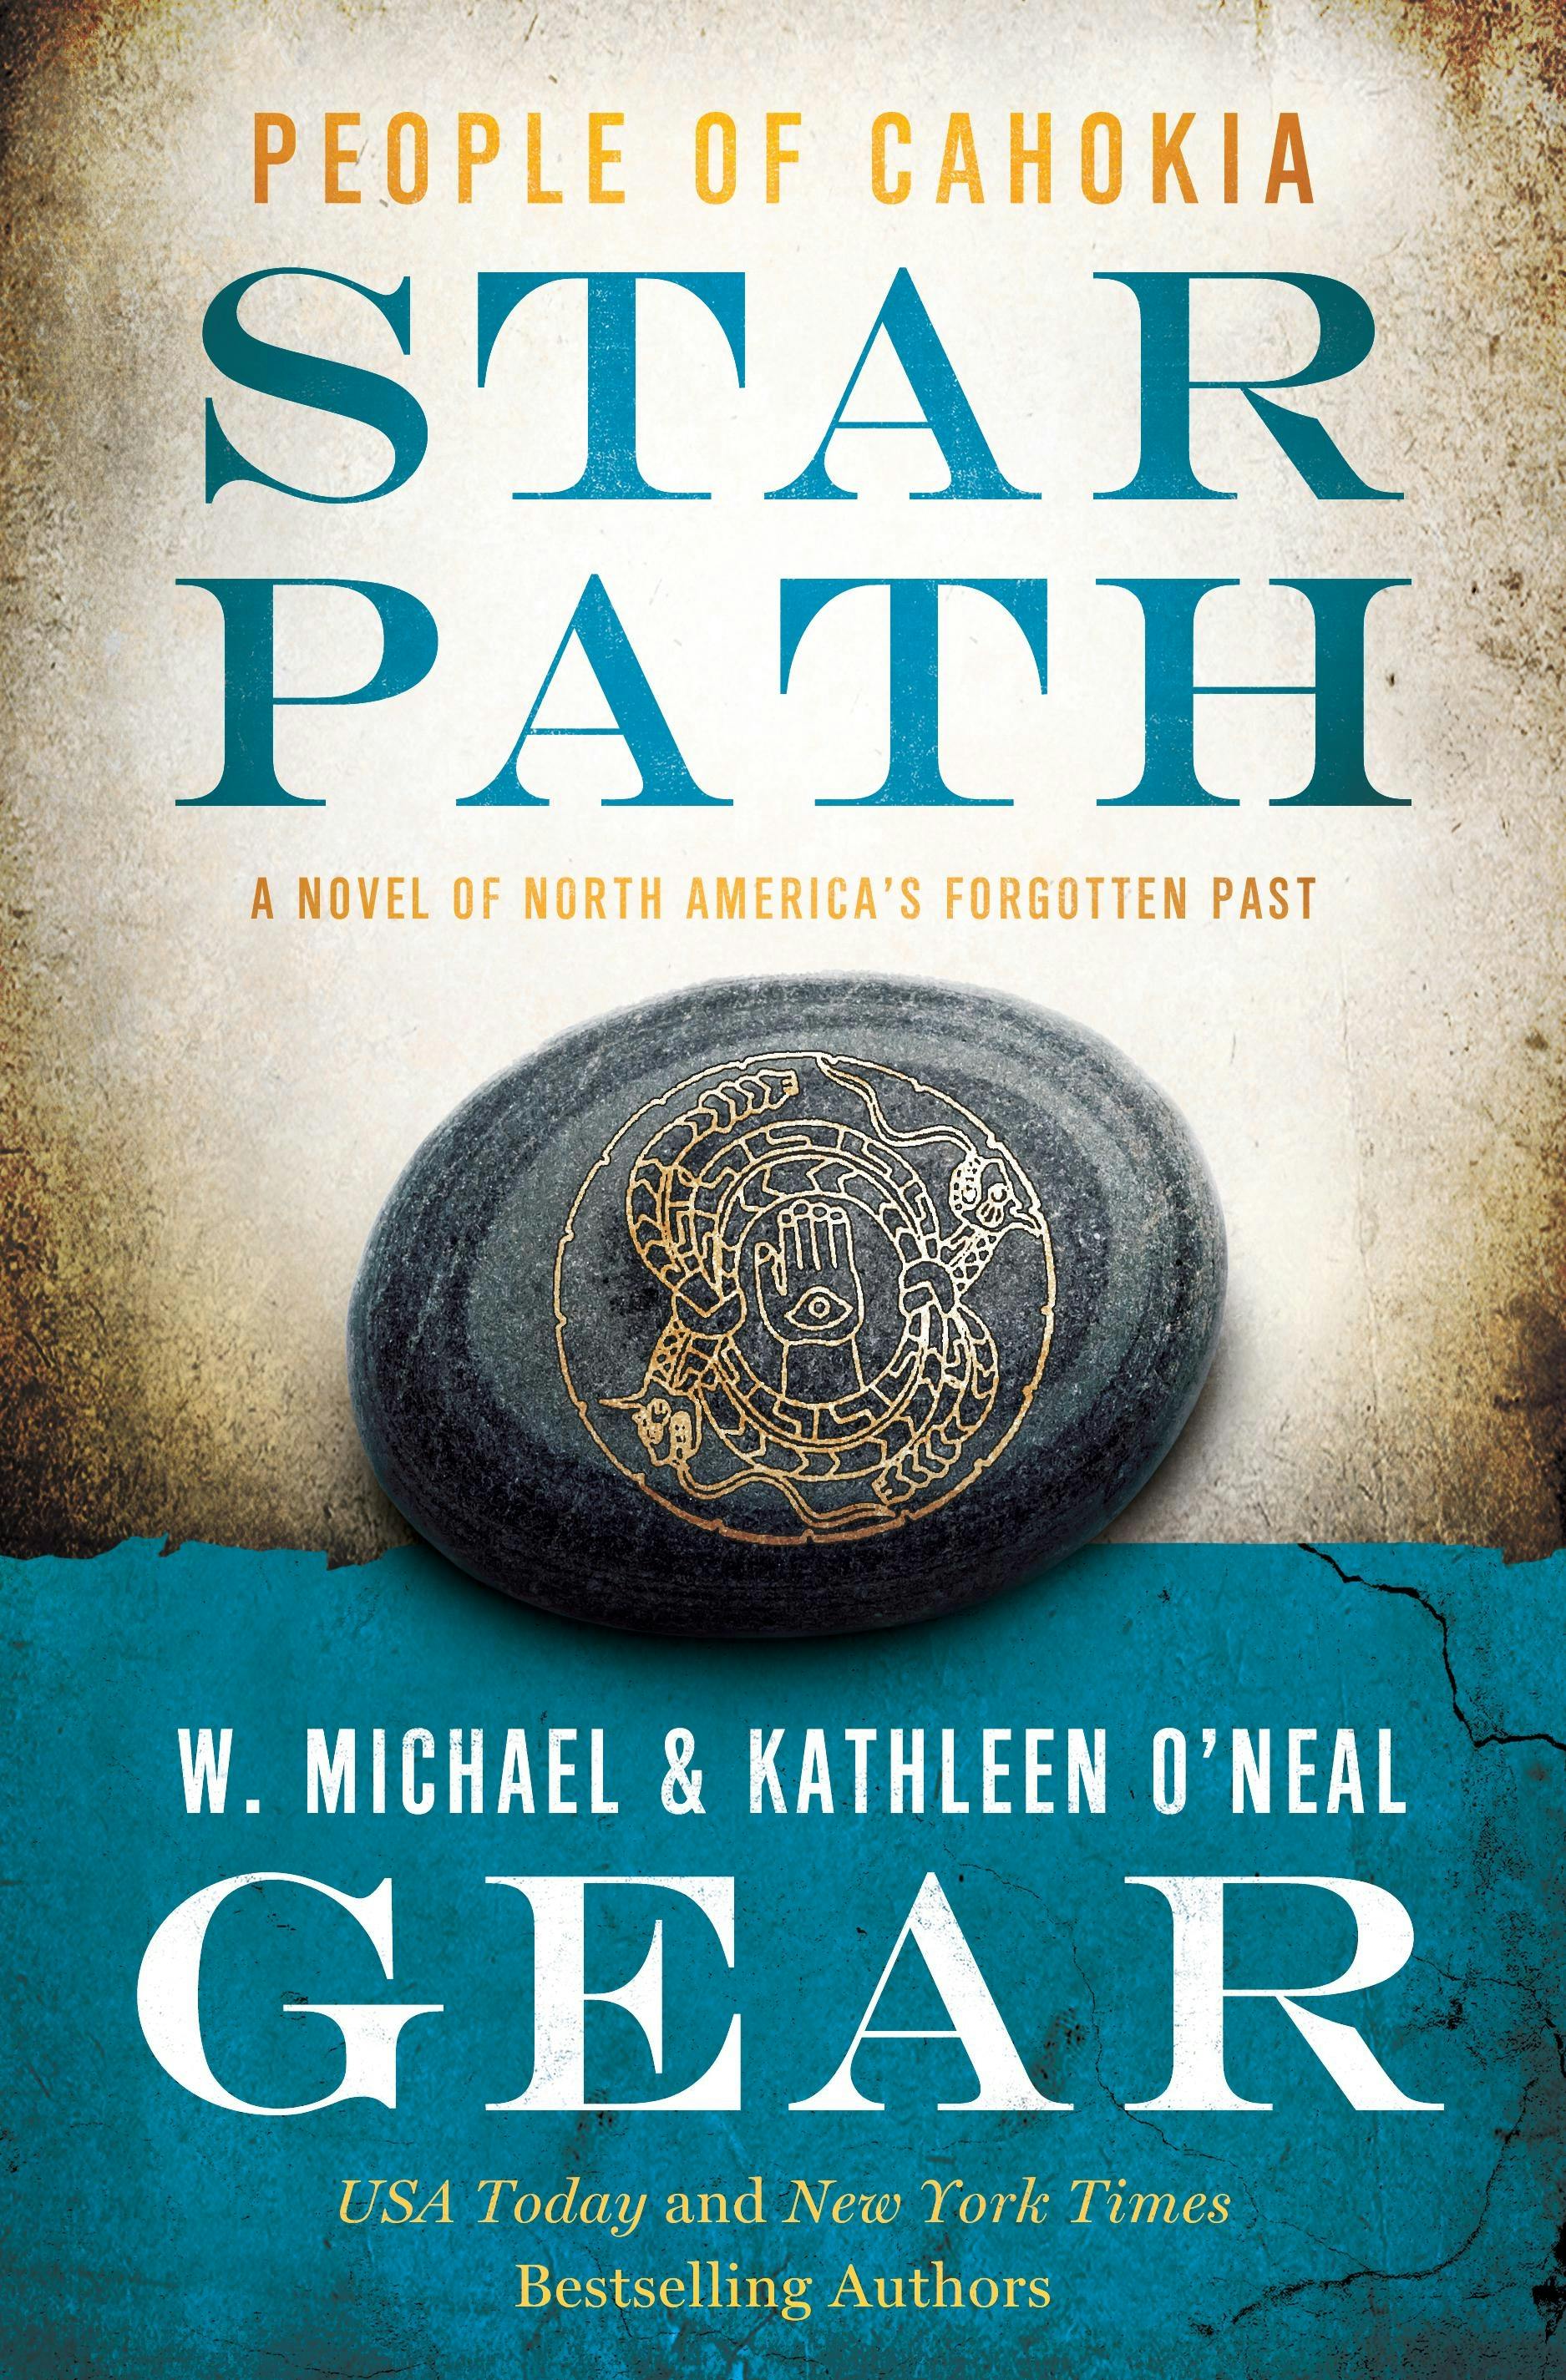 Cover for the book titled as: Star Path